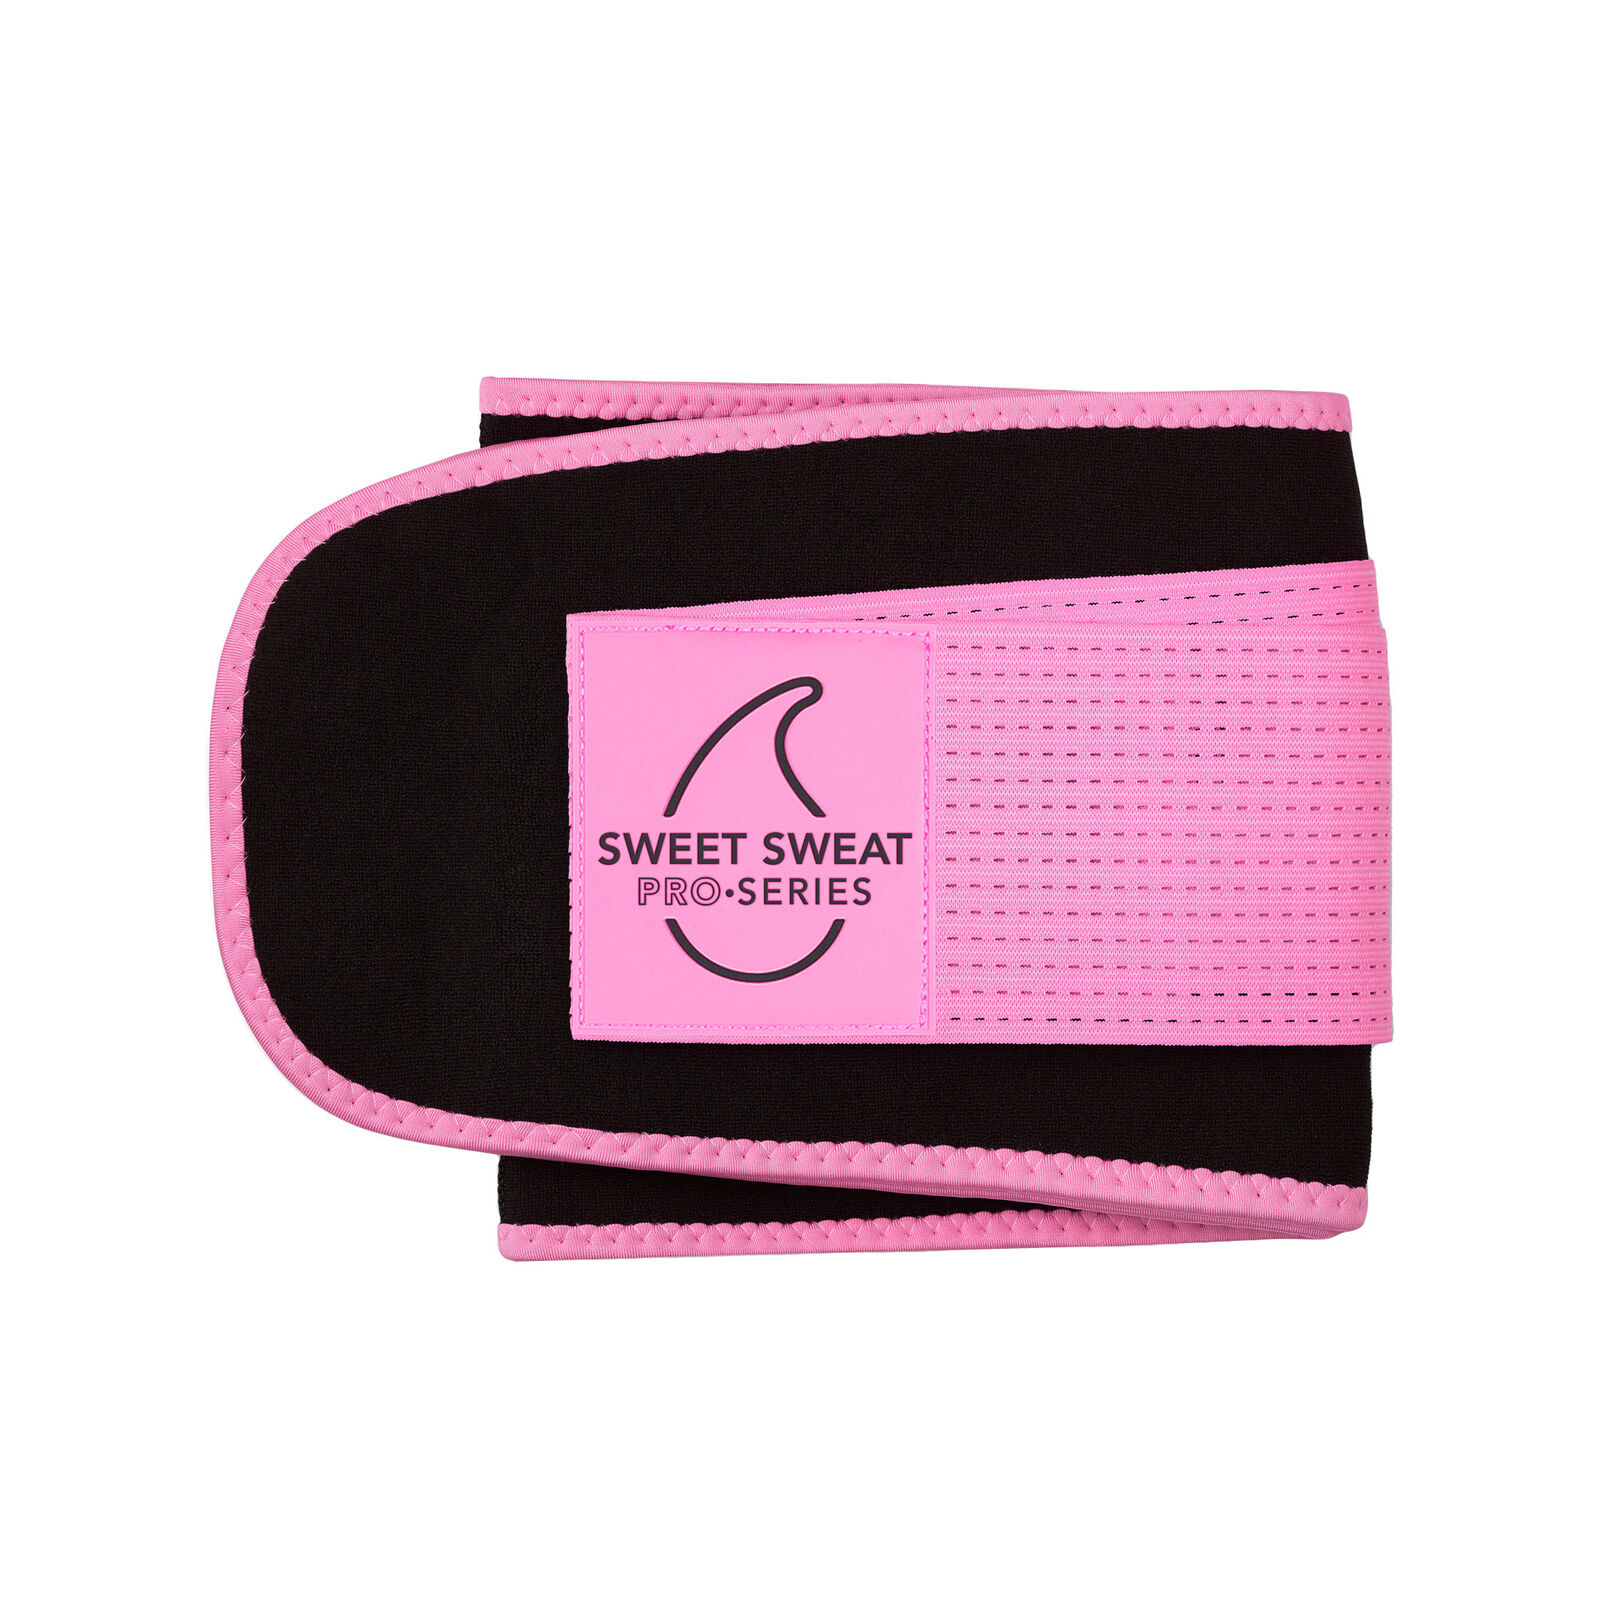 Sweet Sweat Waist Trimmer Pro - Black / Pink M / L (45 x 8.5in) 3.5 - 4mm thick